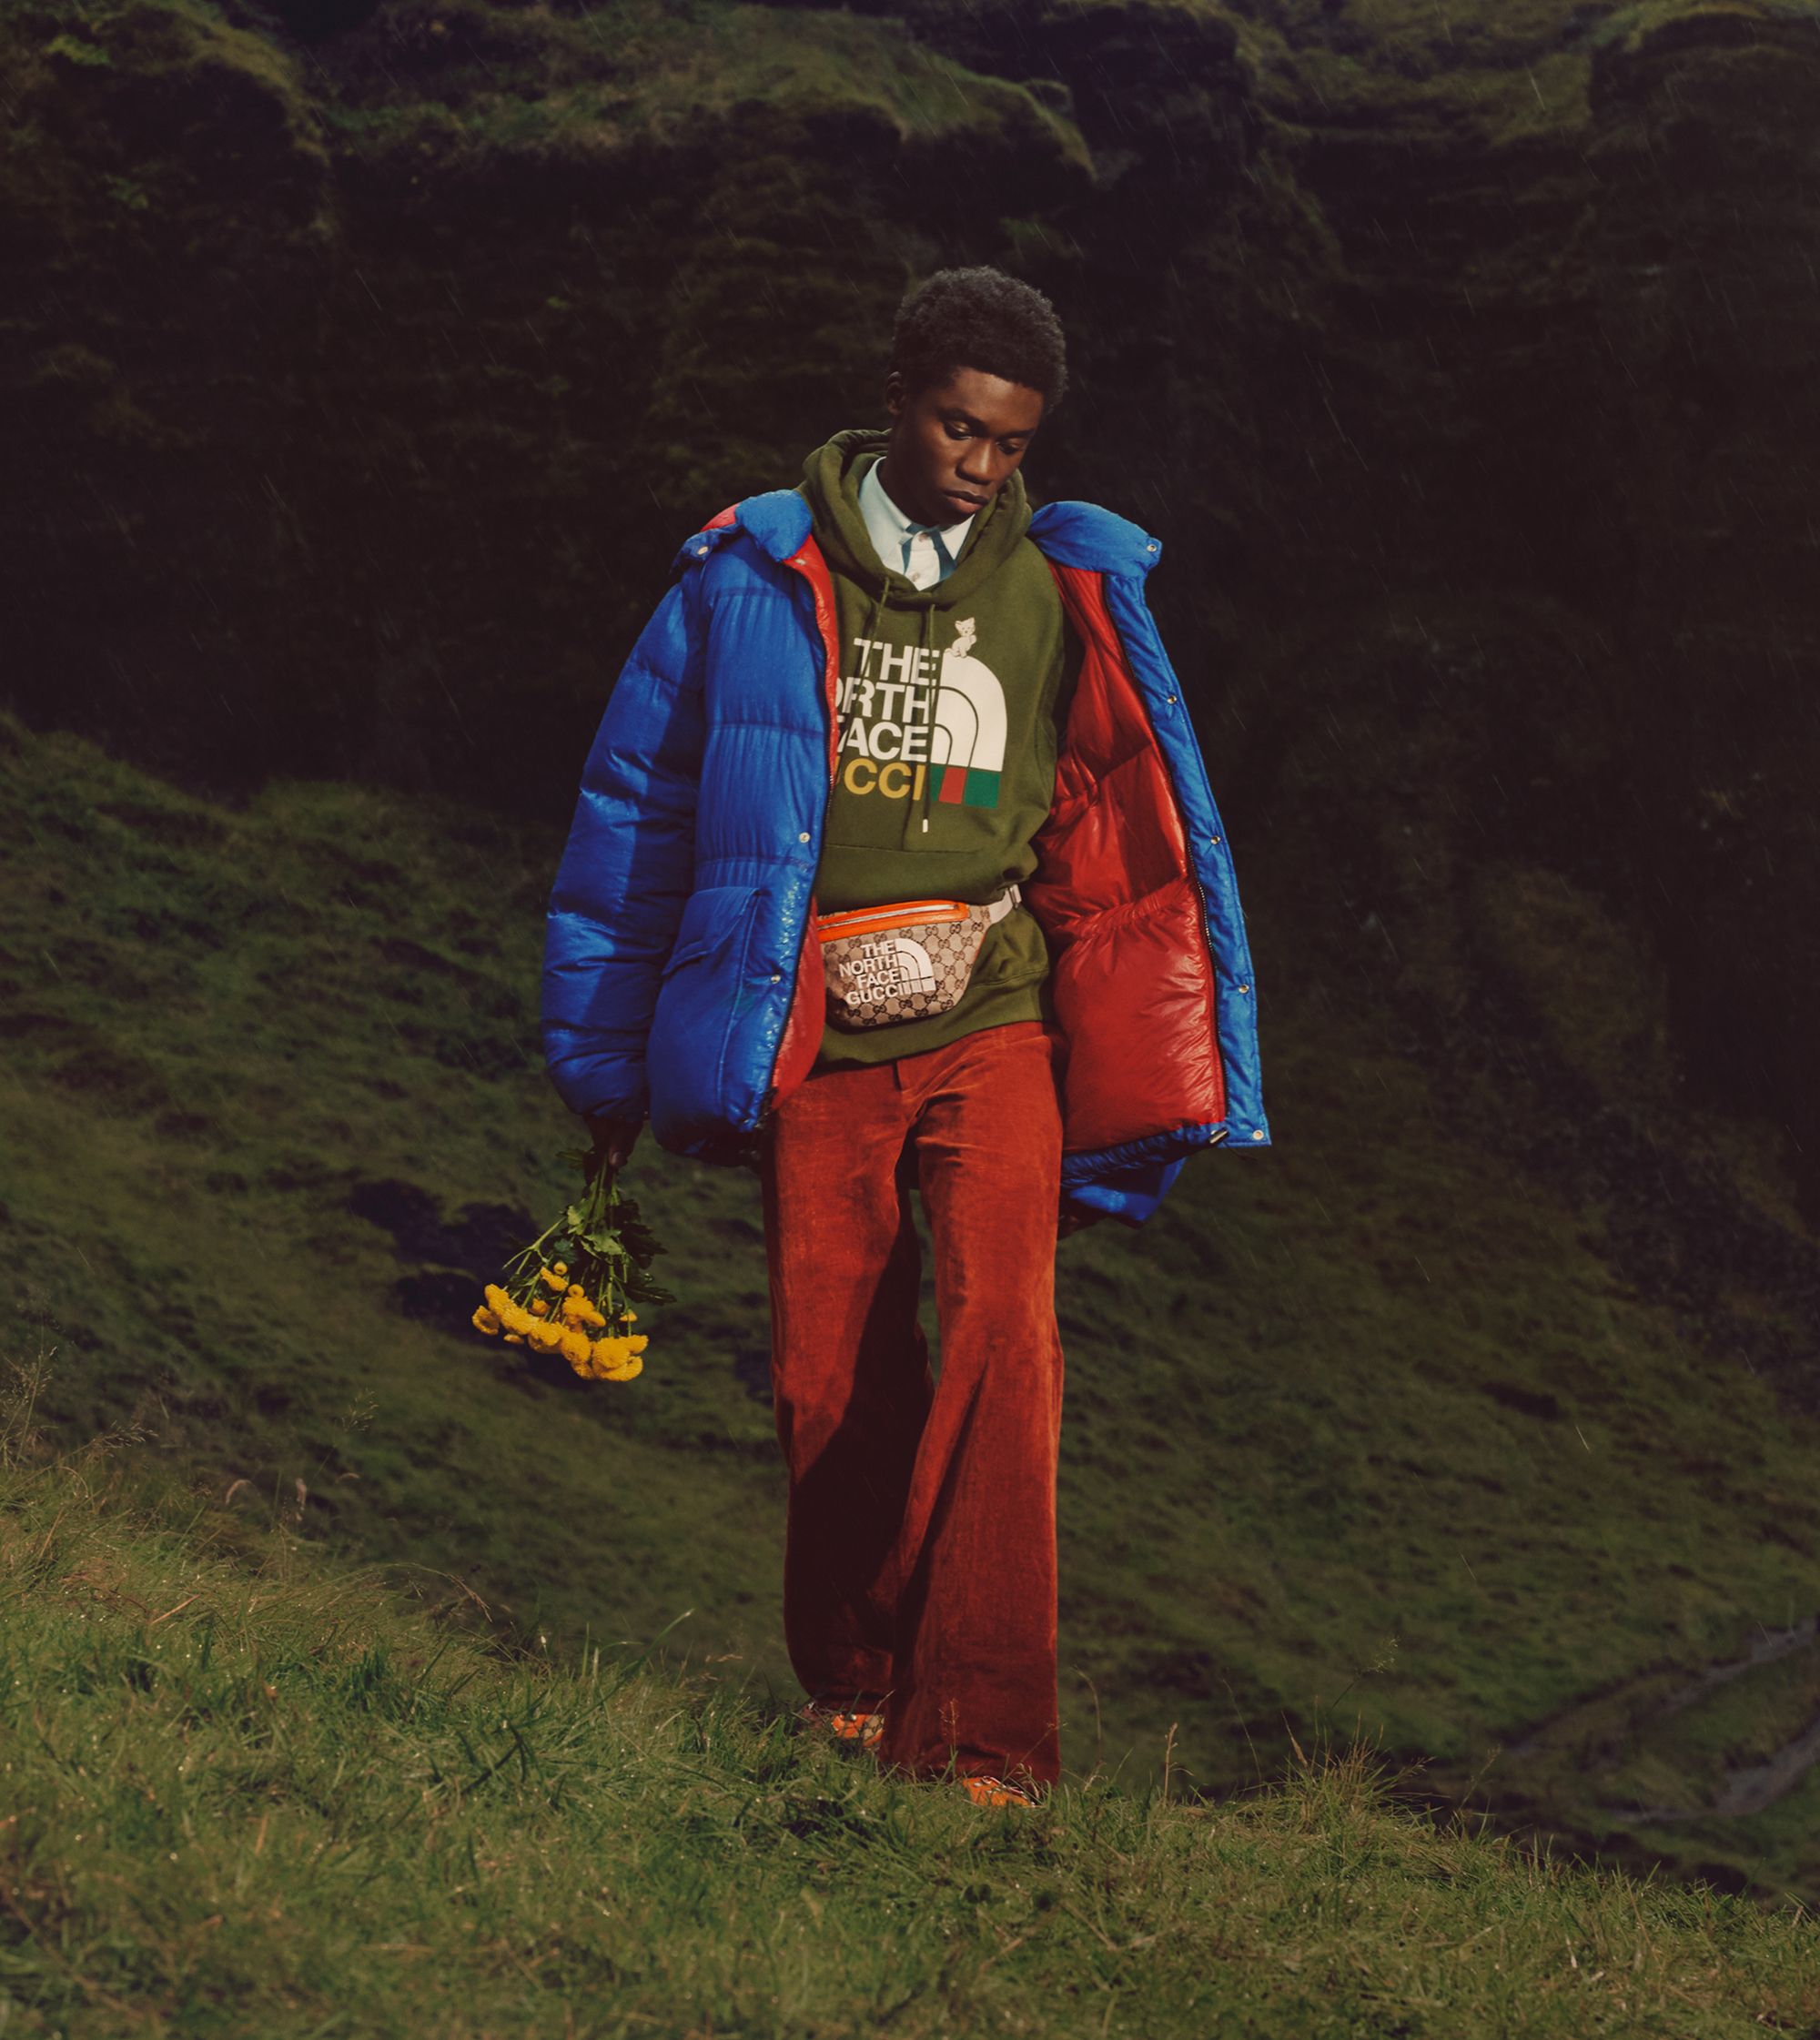 Gucci x North Face Second Collection Release Date Details – Footwear News